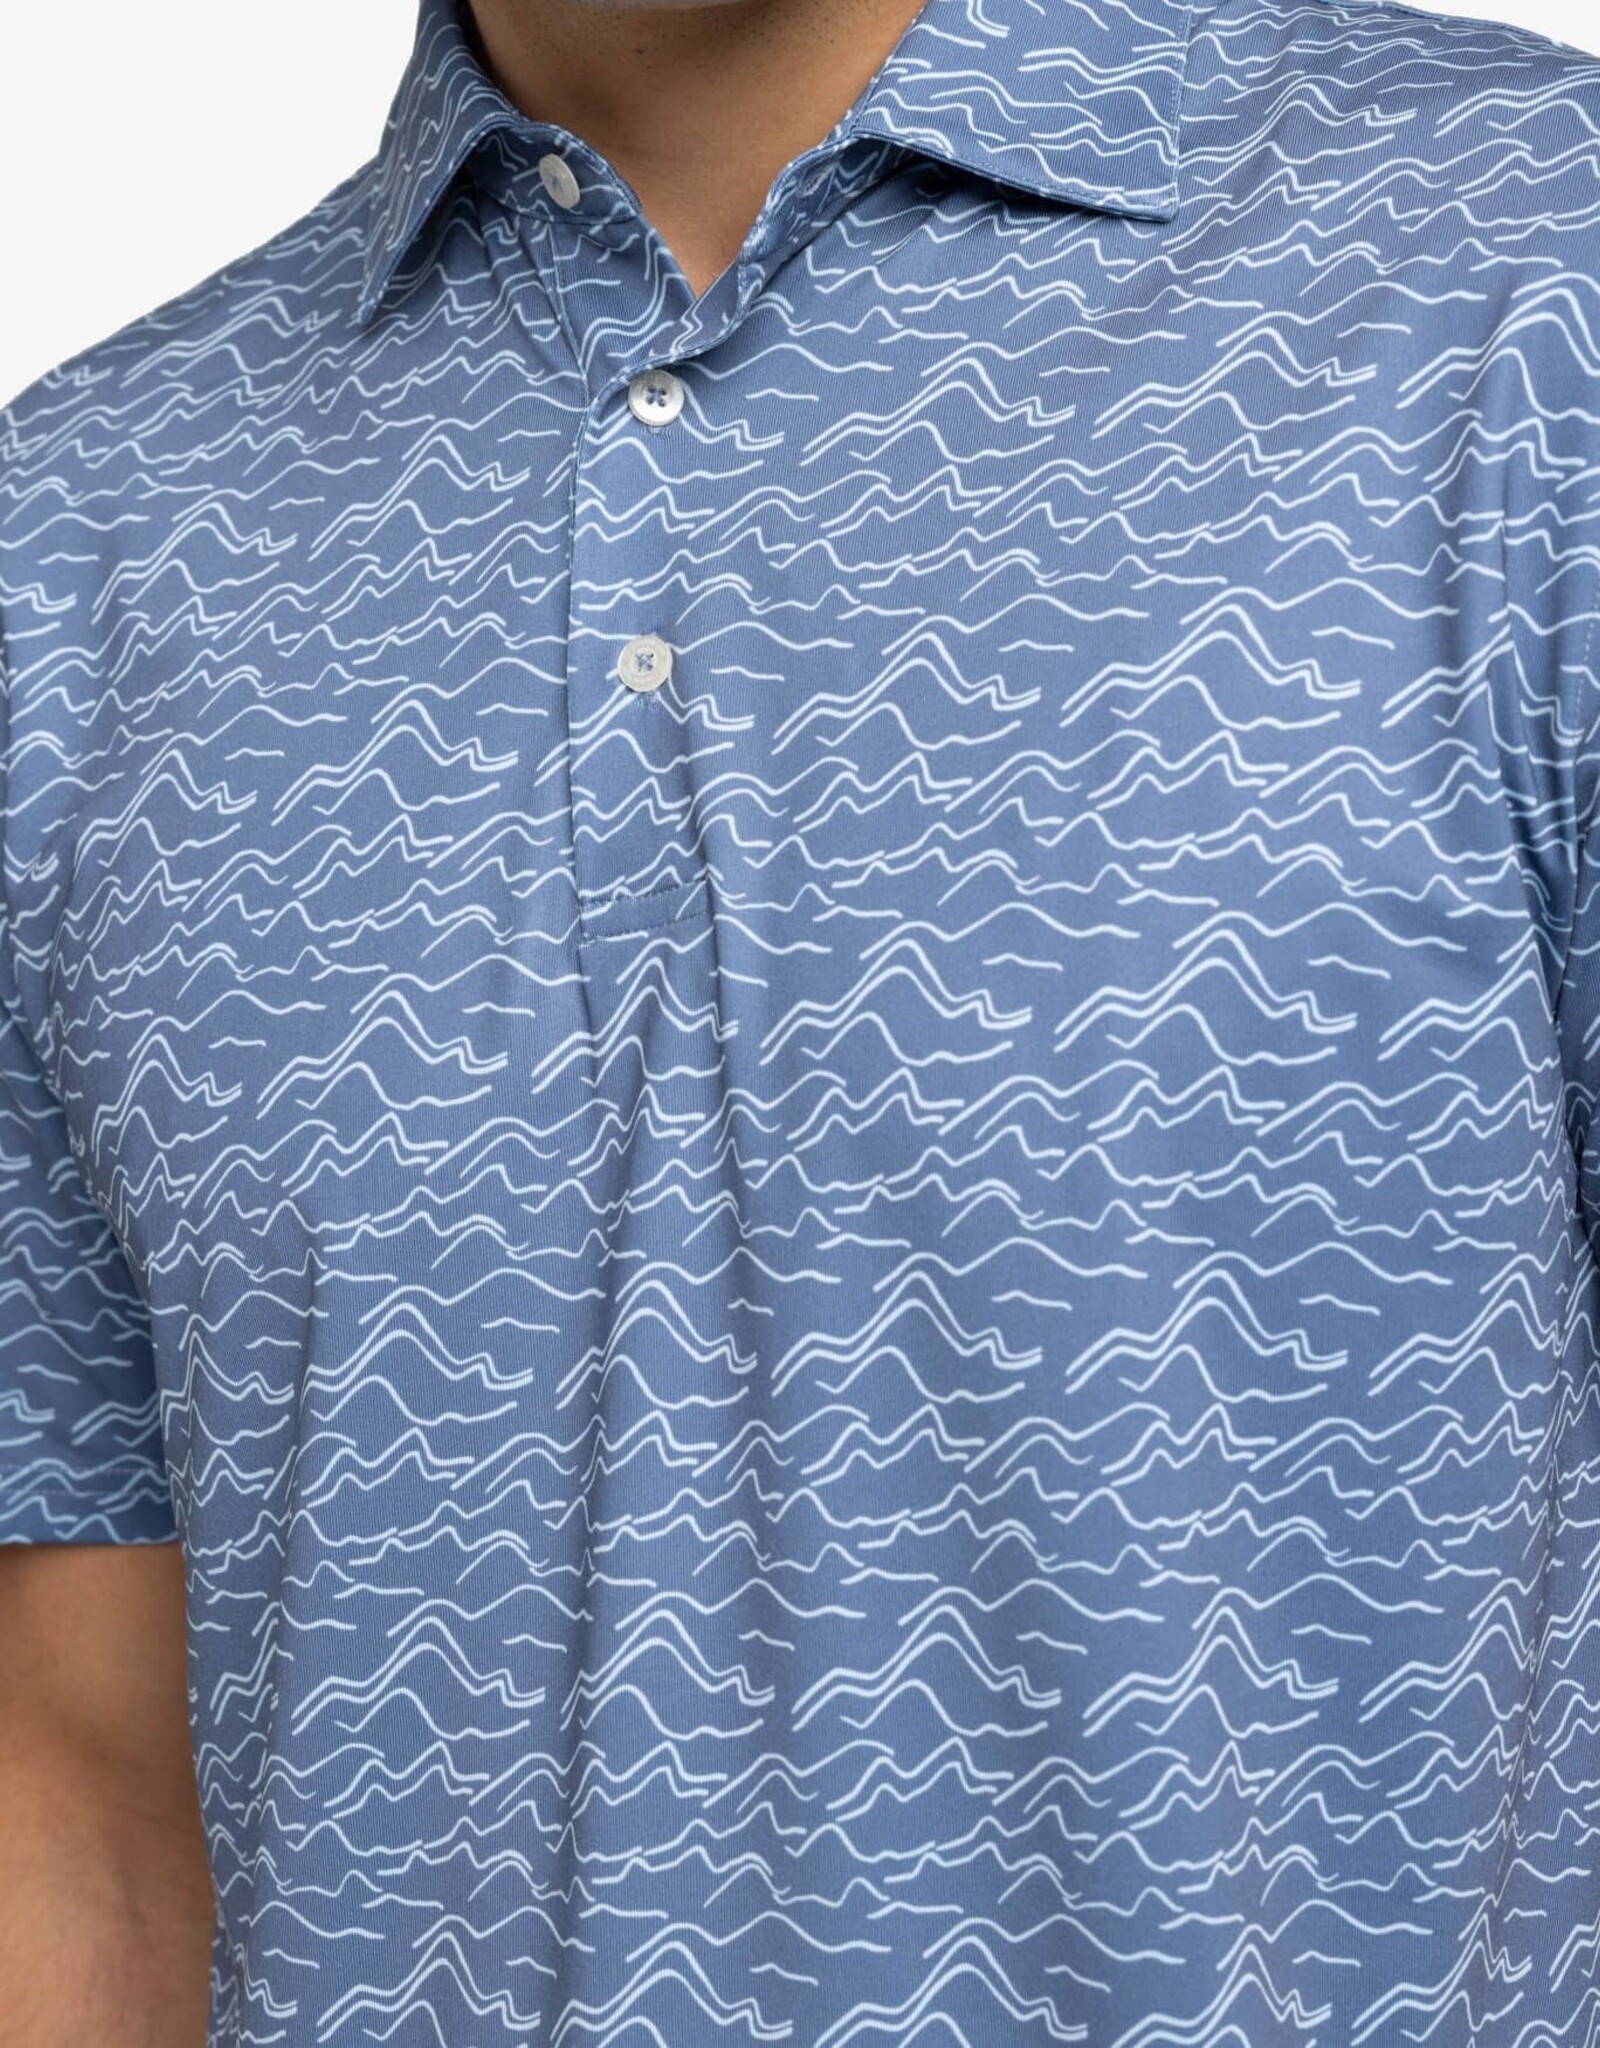 Southern Tide Driver Change Your Altitude Polo